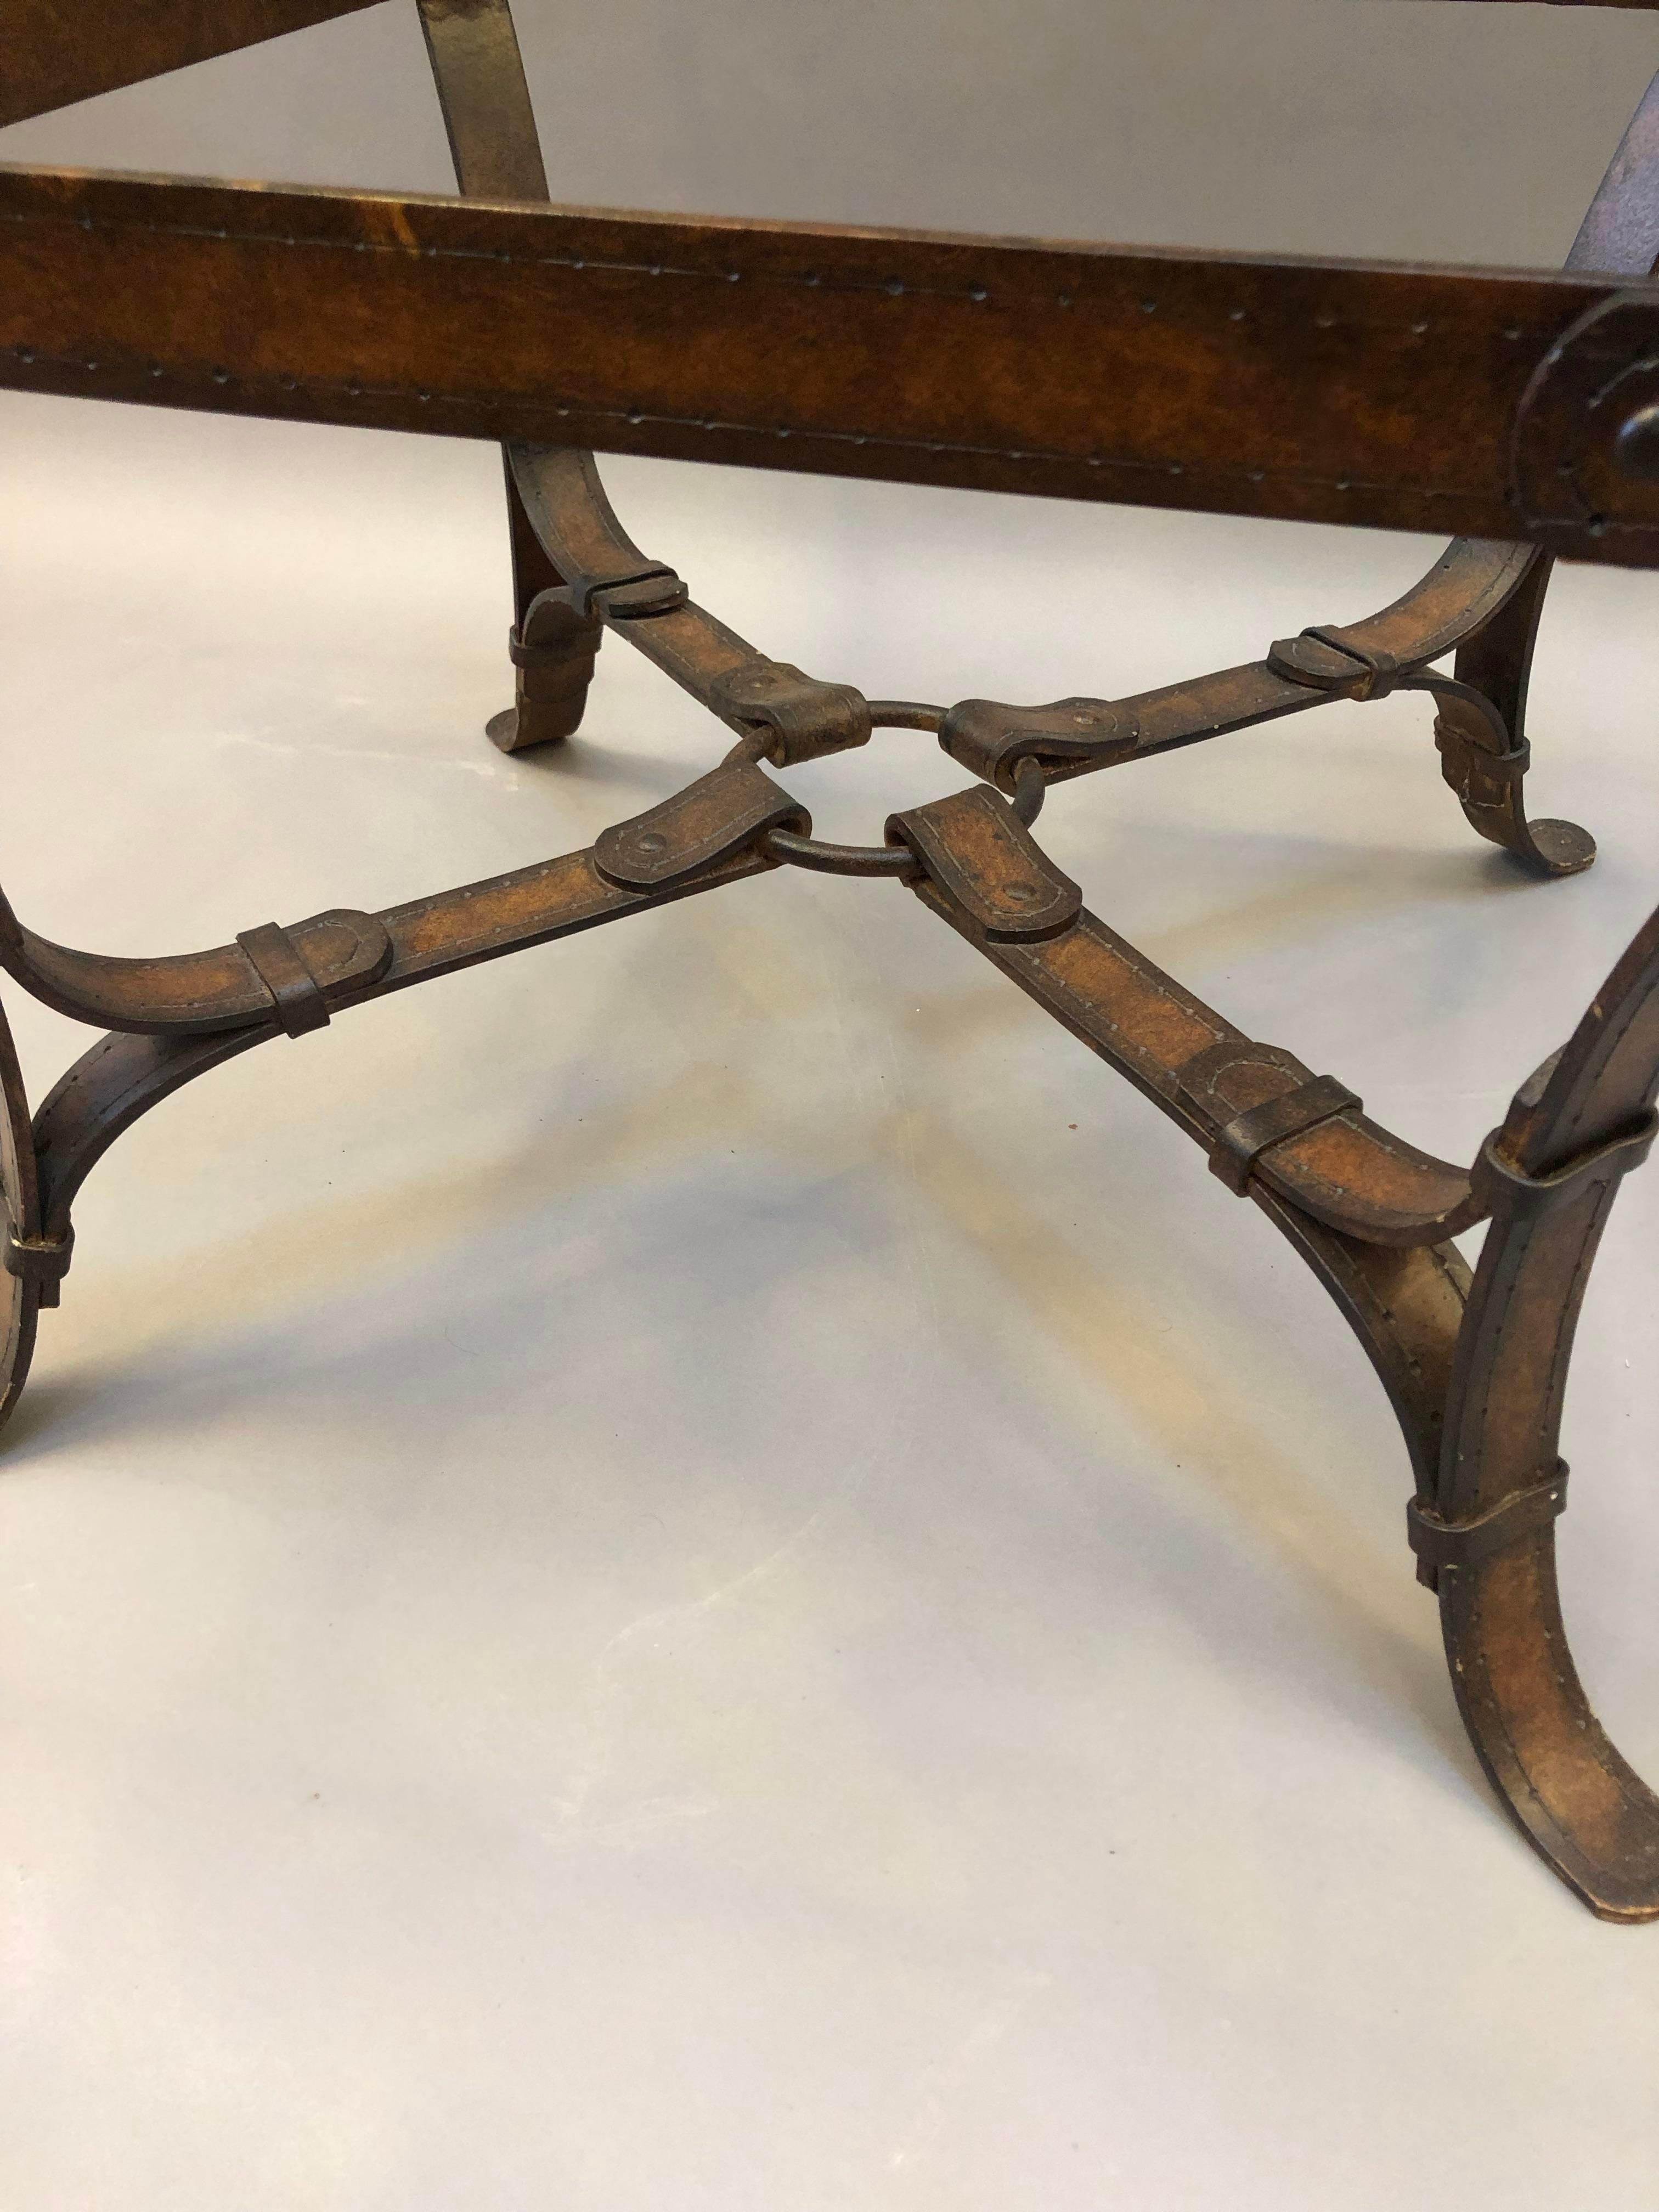 Extraordinary Equestrian Style Iron and Glass Side Table.  With Curving  “Faux Leather Harness Straps” crafted as the main Structure and a thick beveled glass top.  20th Century